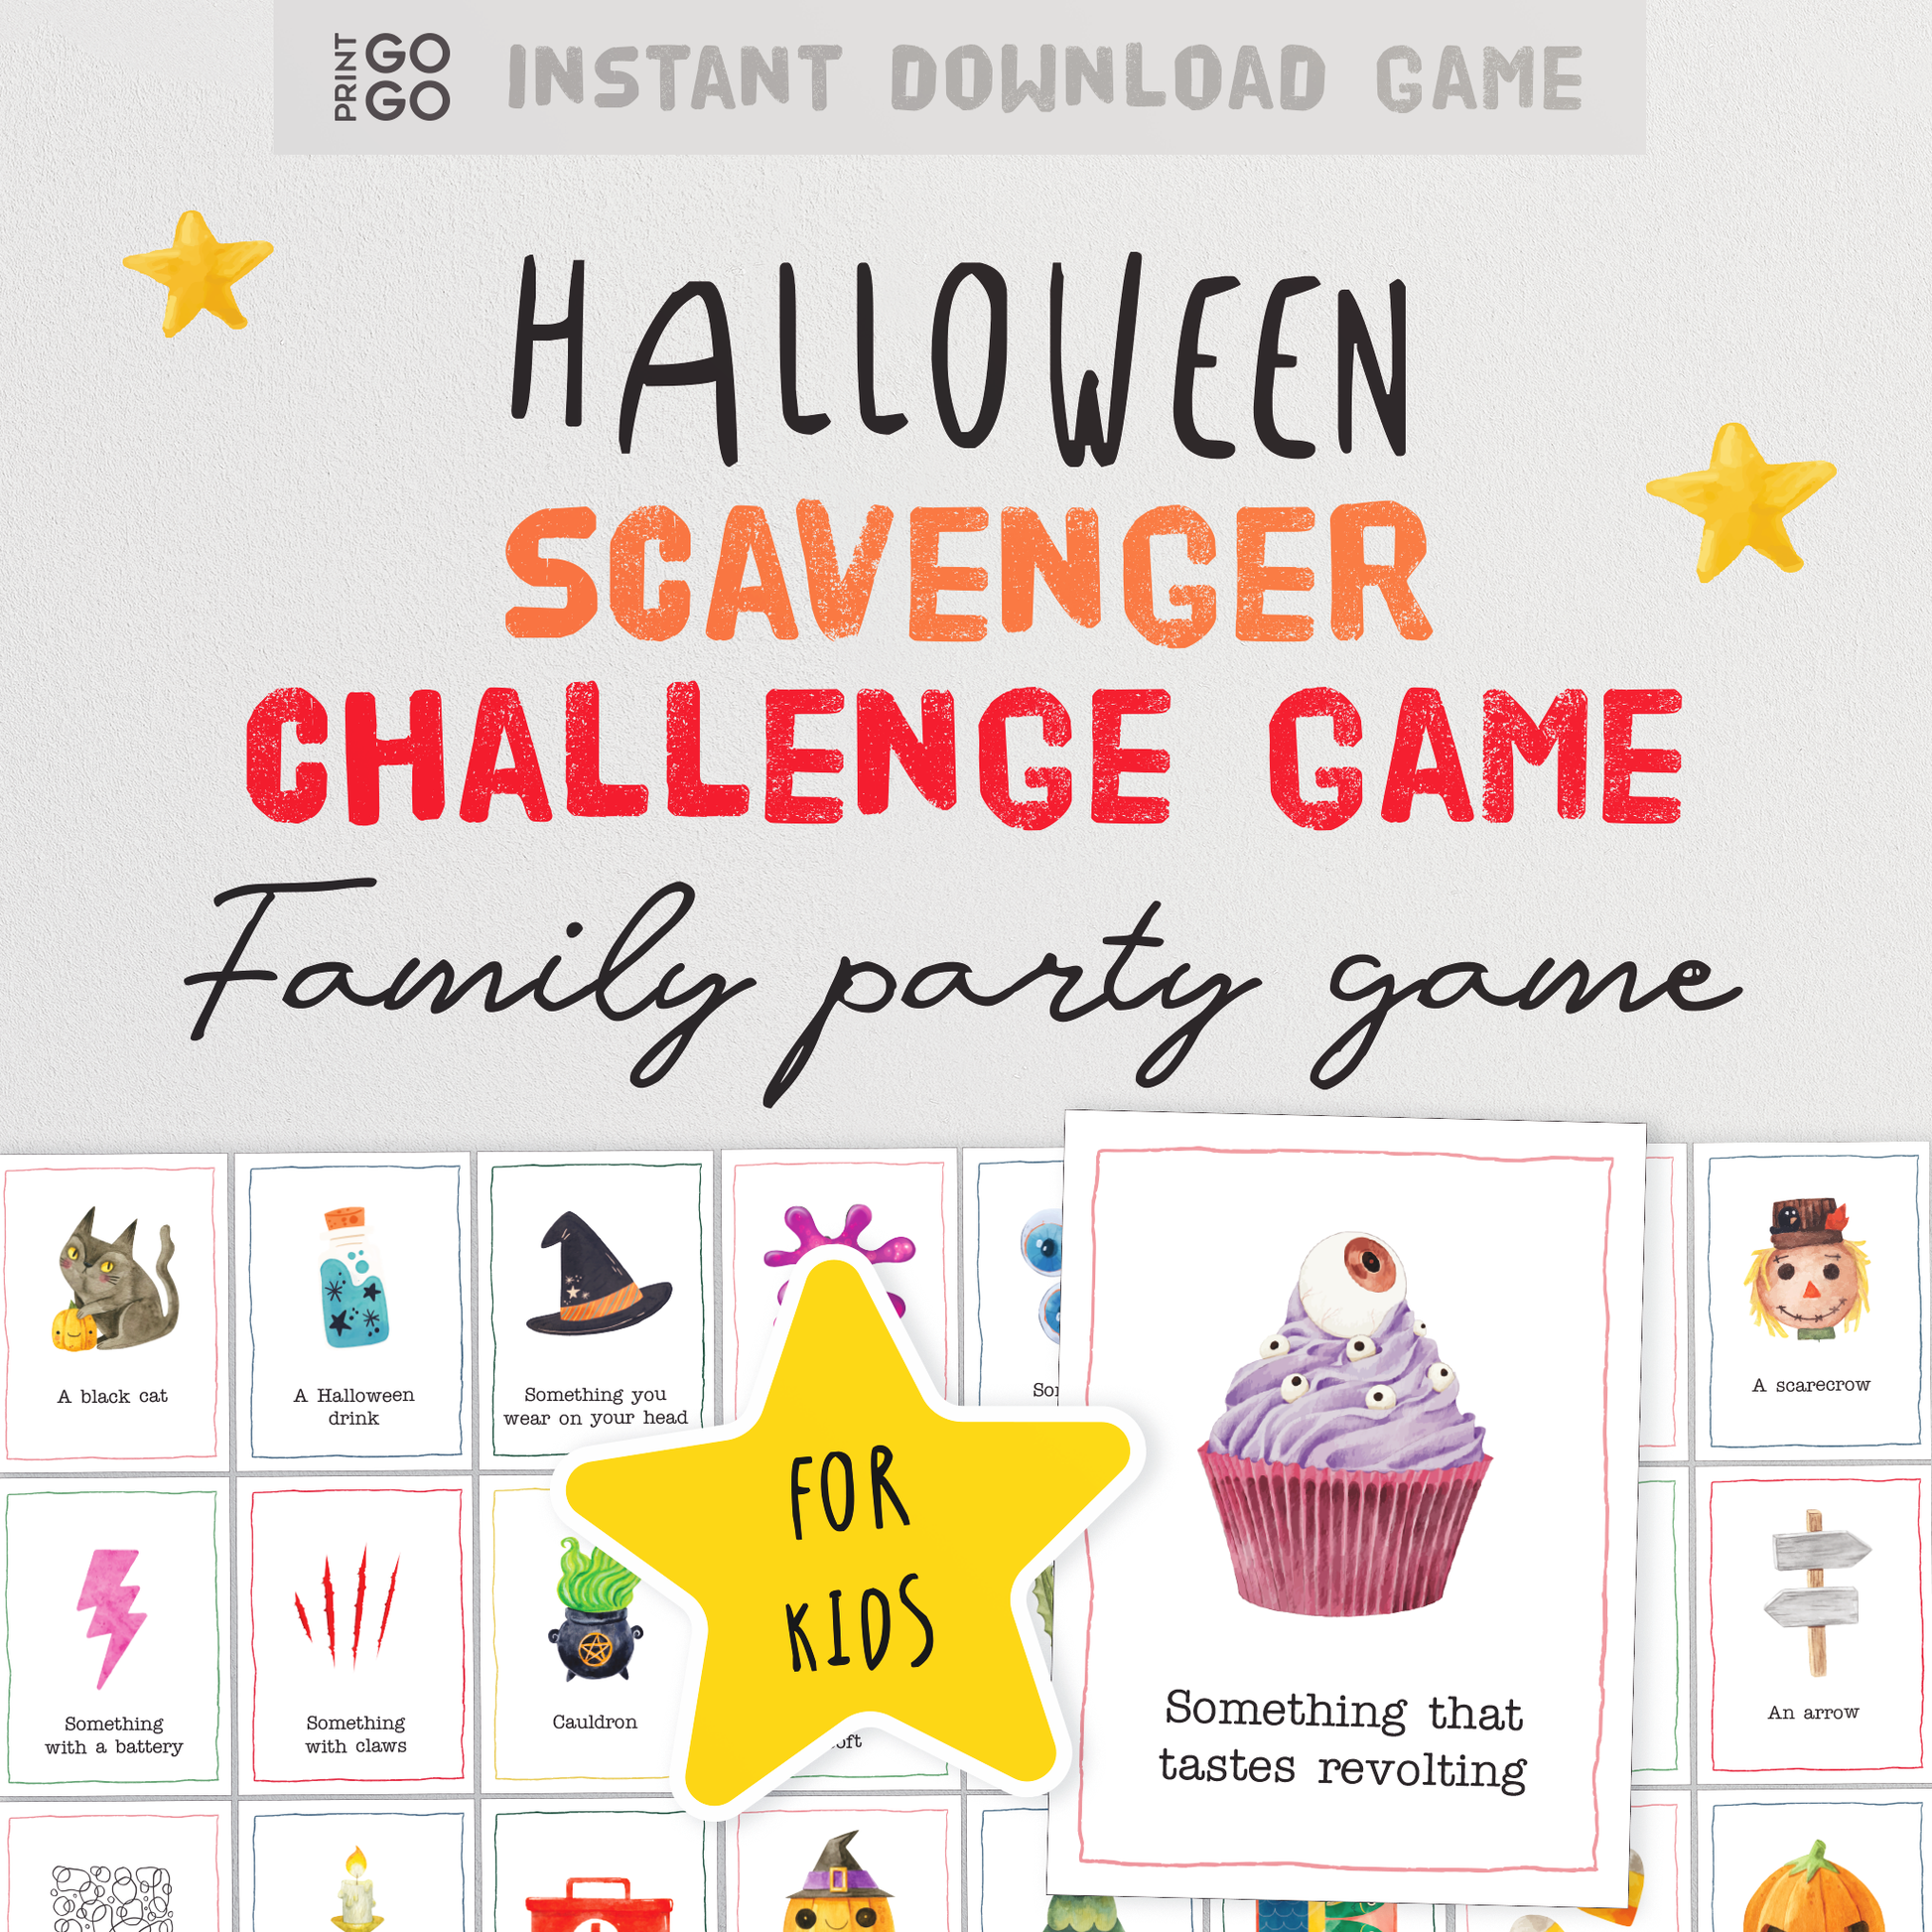 Halloween Scavenger Challenge Game for Kids - Draw a Card, Start the Timer and Hunt!